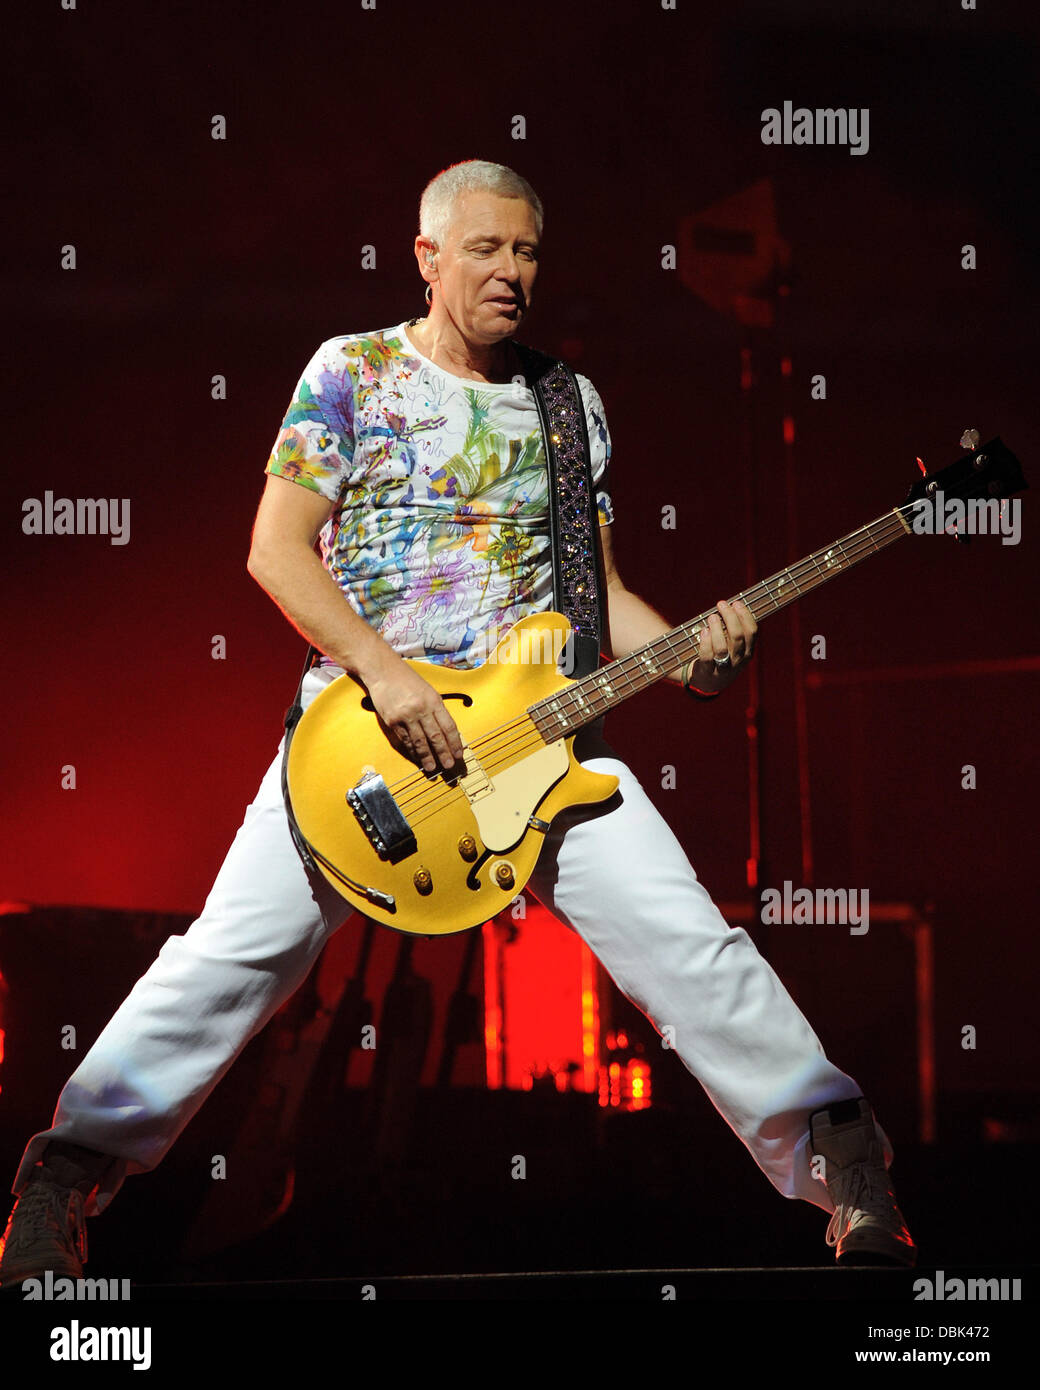 U2′s Adam Clayton talks about new album, new amplifier, upcoming shows 